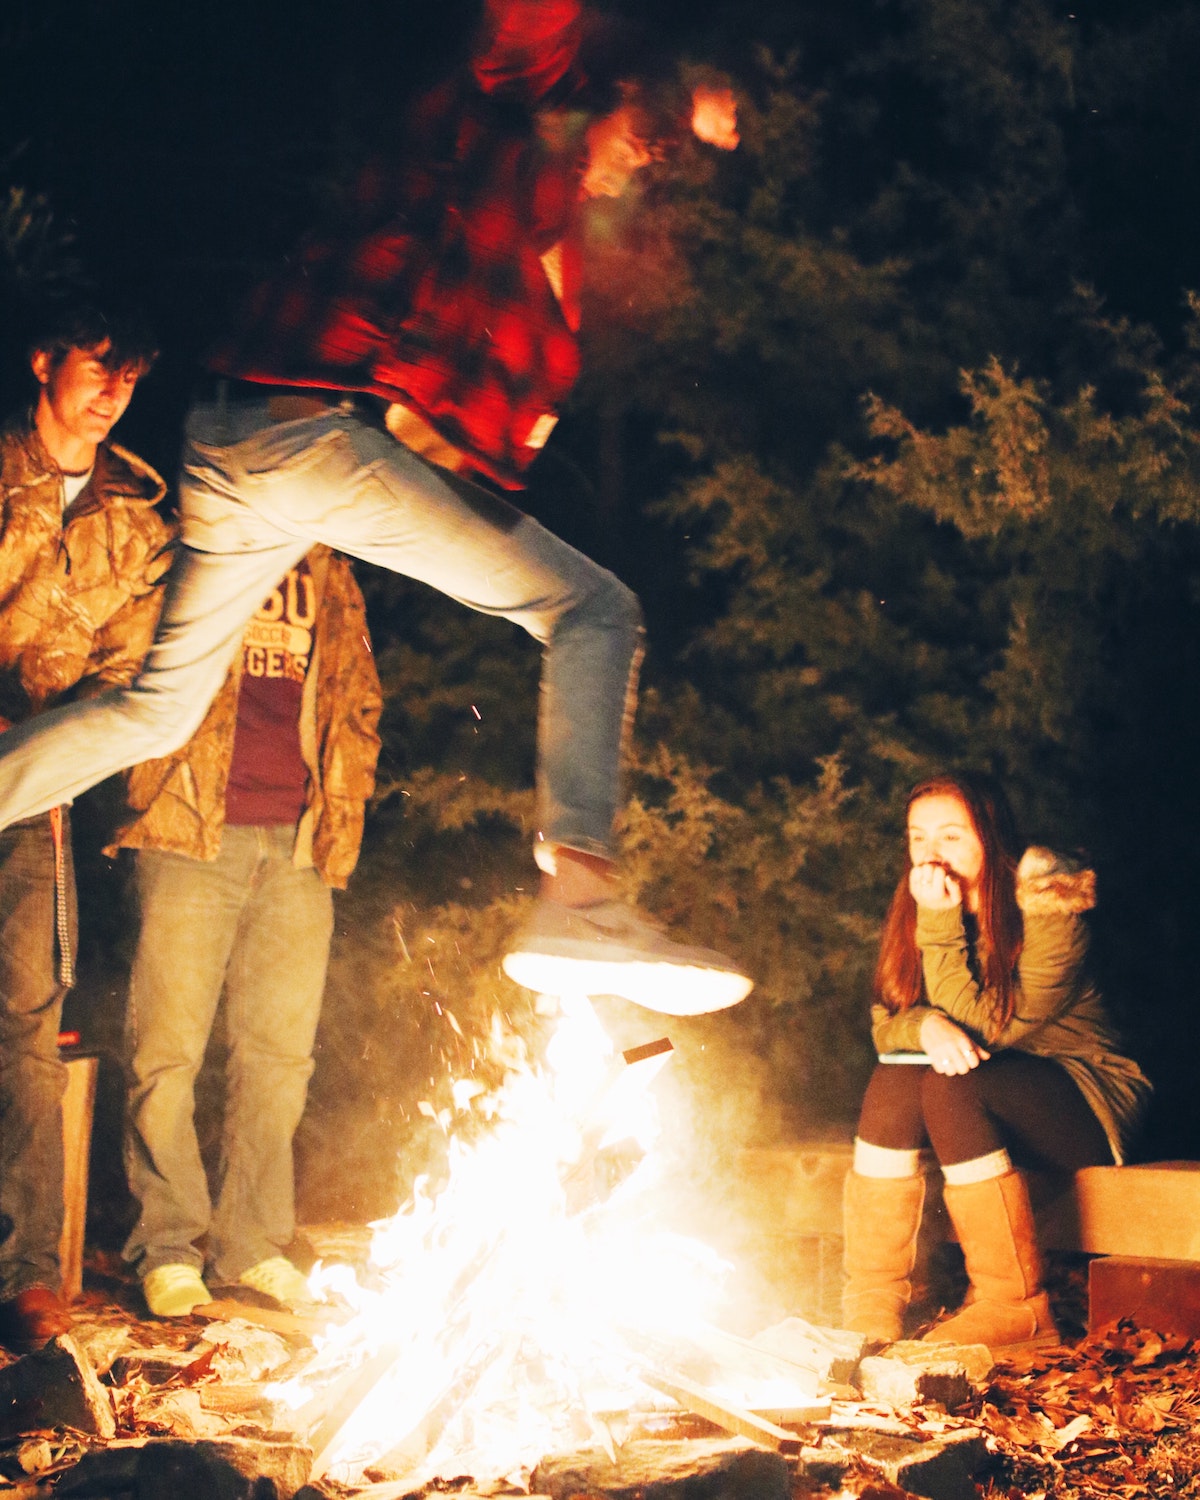 Man in a plaid shirt and jeans leaping over a bonfire as three other people look on.